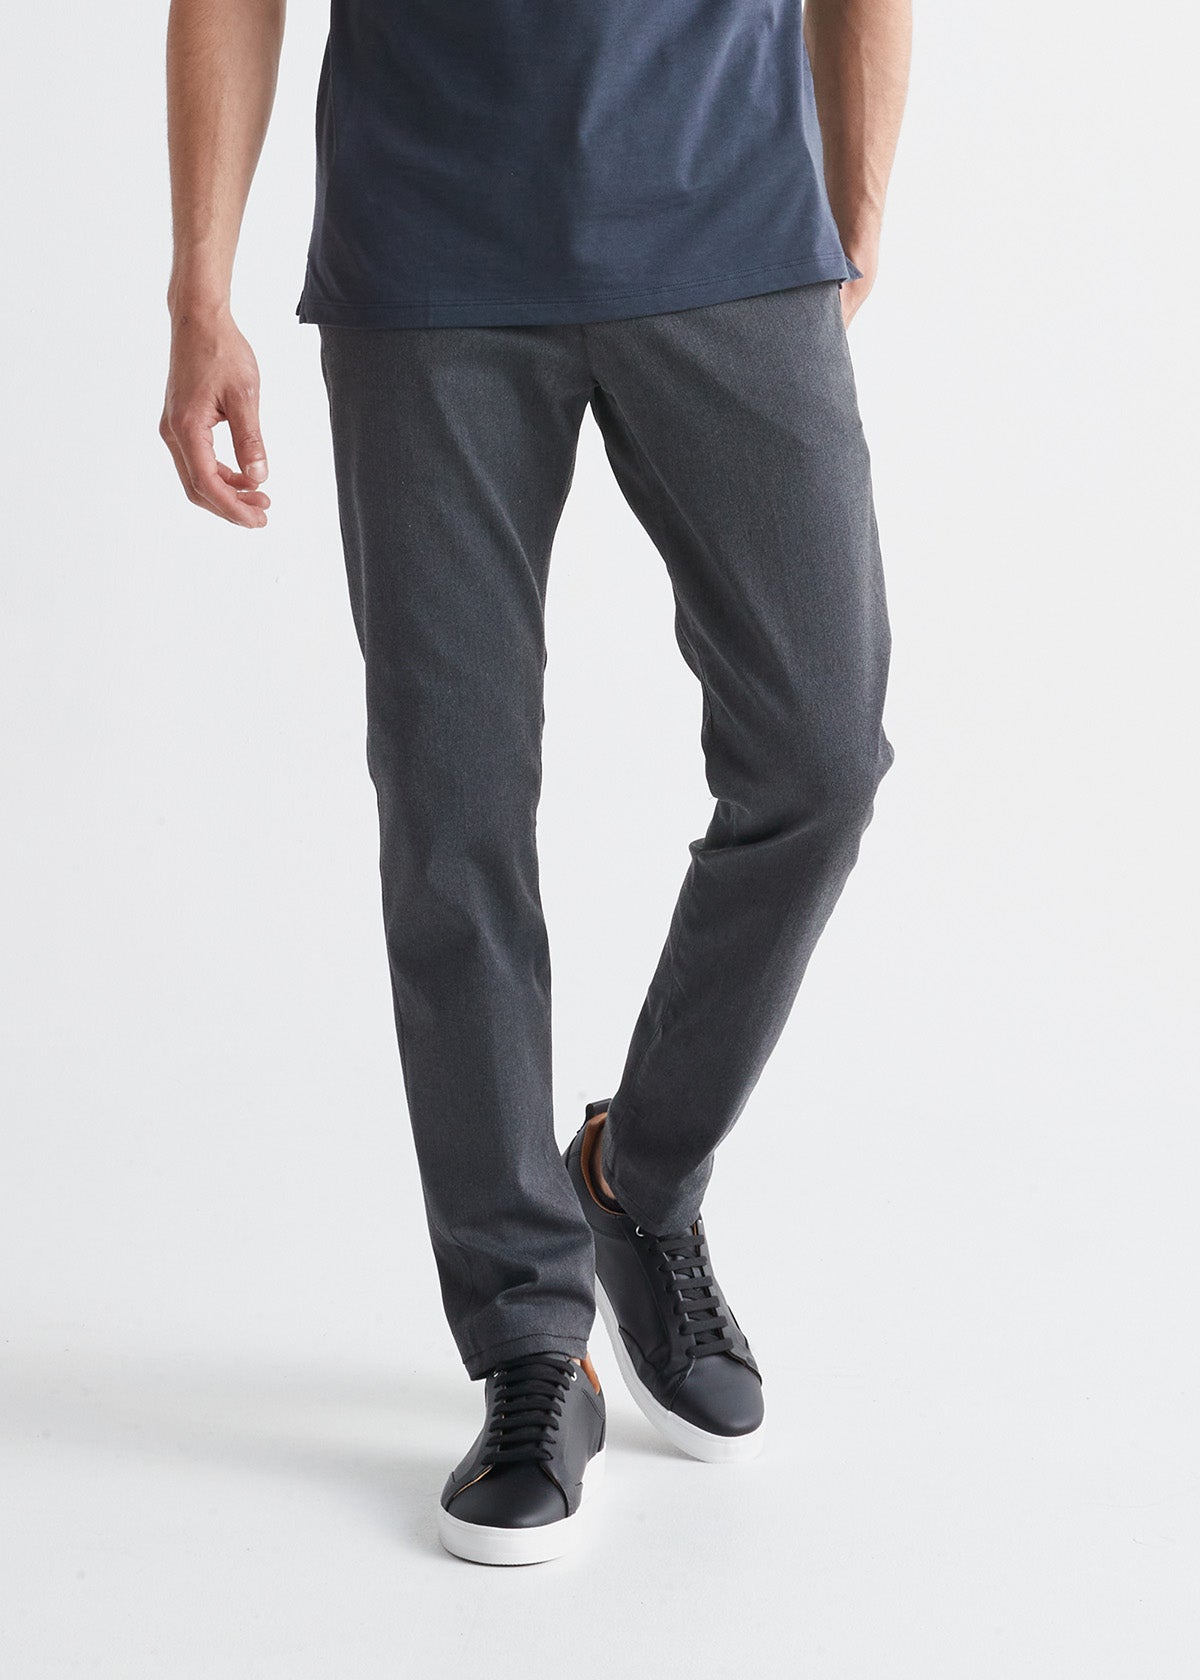 fitted dress pants